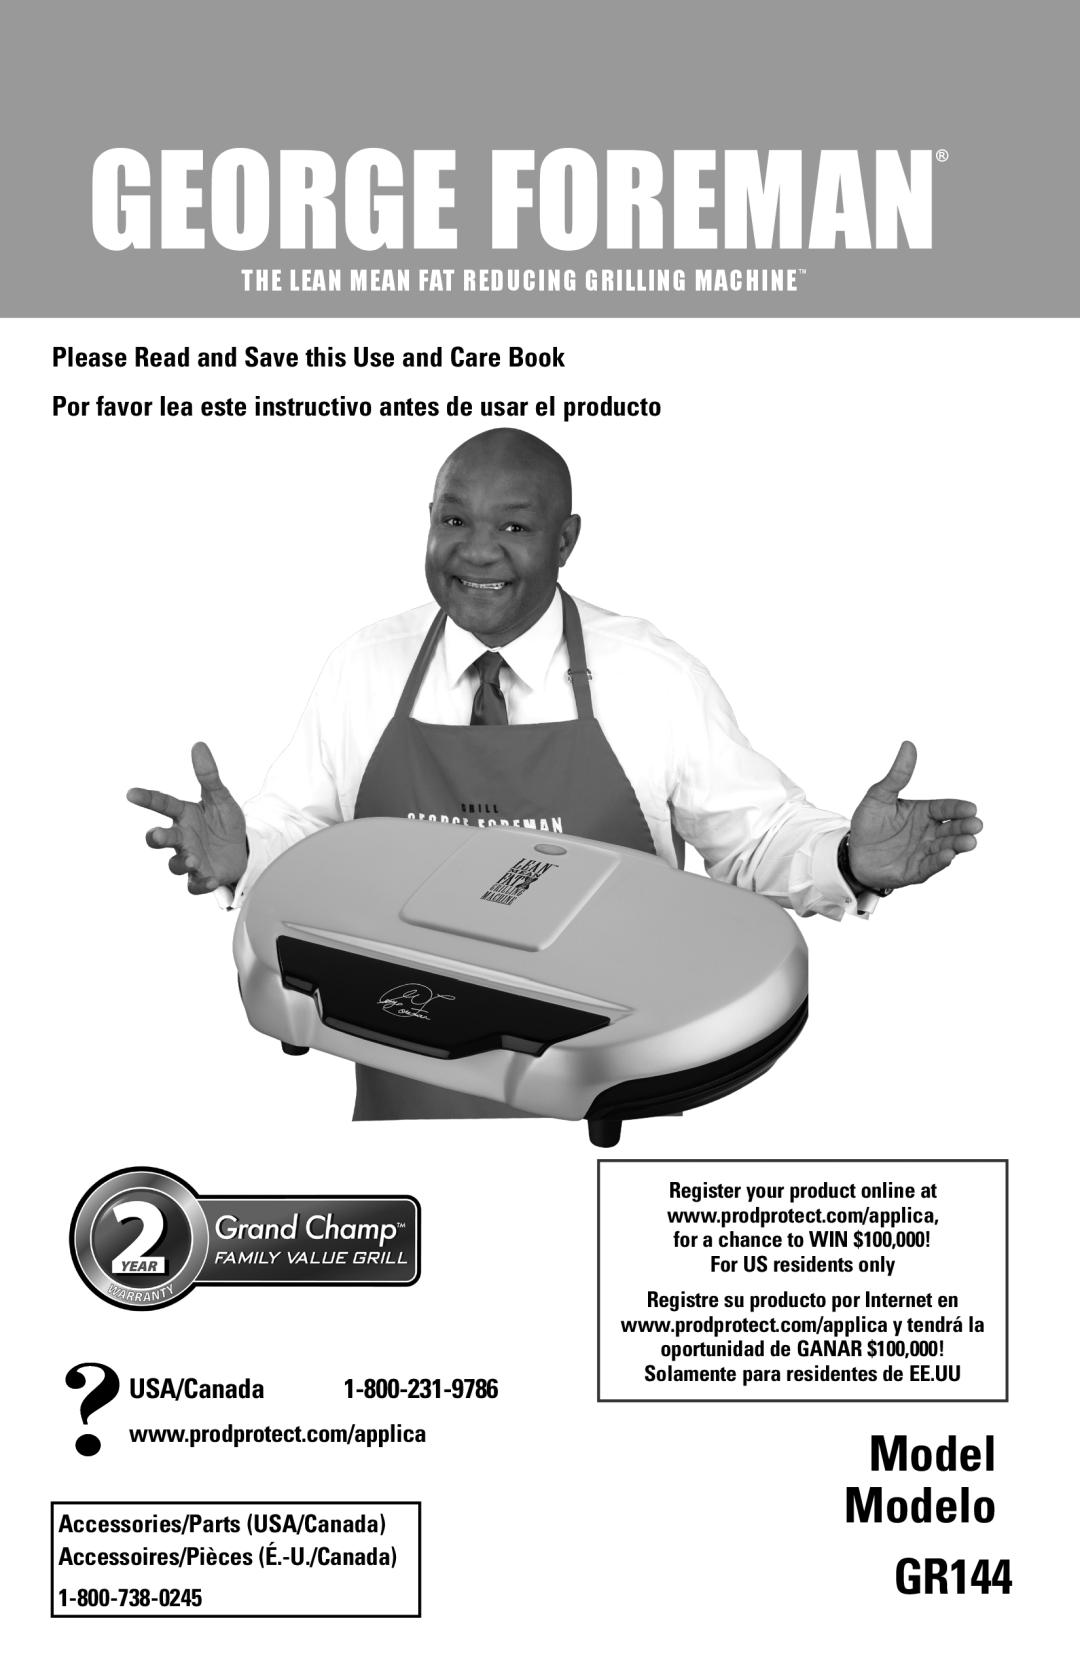 George Foreman manual Model Modelo GR144, The Lean Mean Fat Reducing Grilling Machinetm, Accessories/Parts USA/Canada 